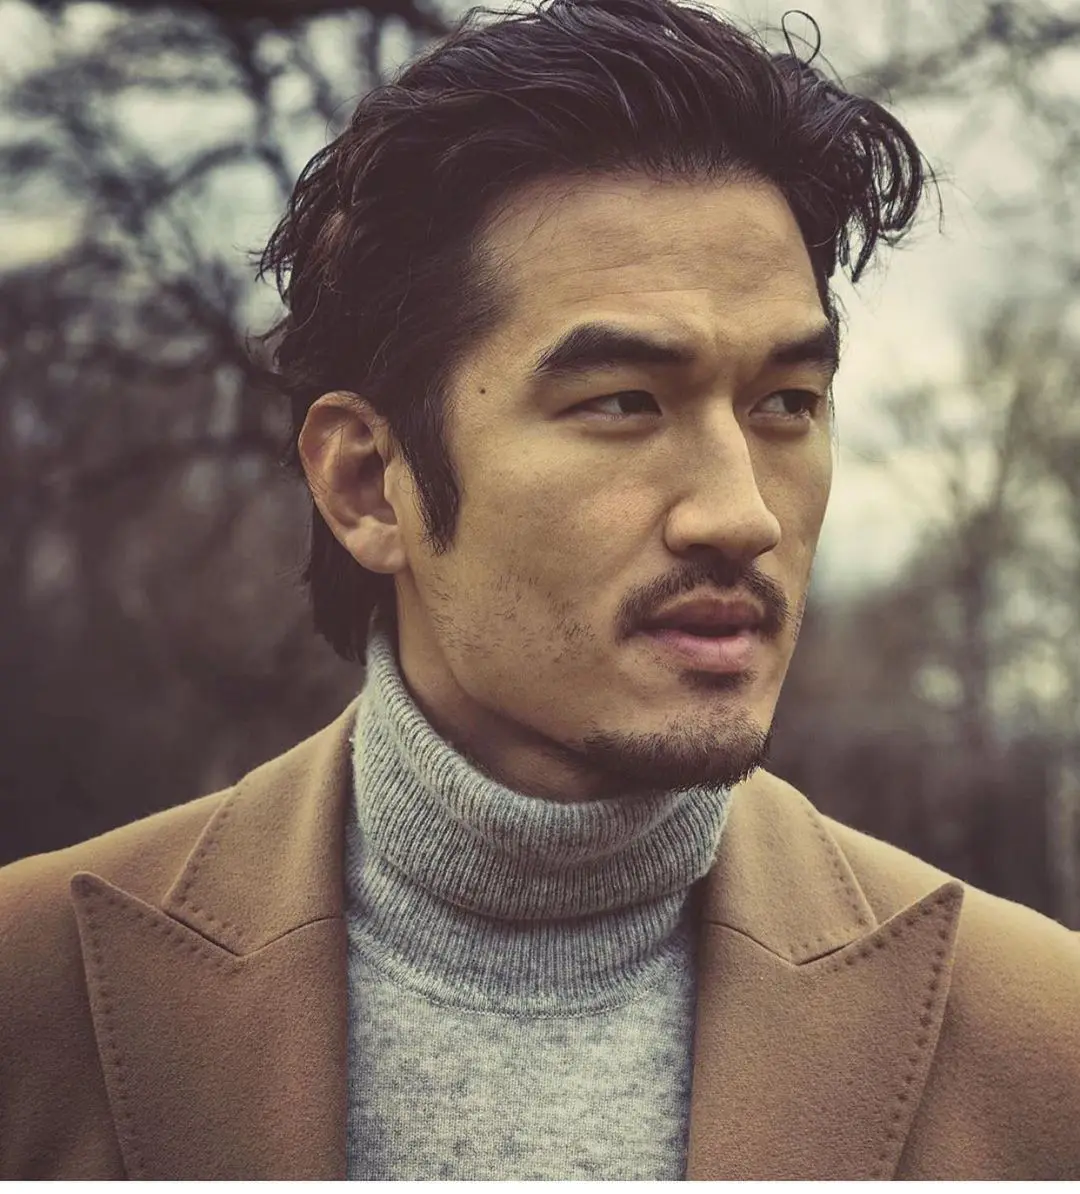 9 Cool Asian Beard Ideas You Should Try Out - The Modest Man